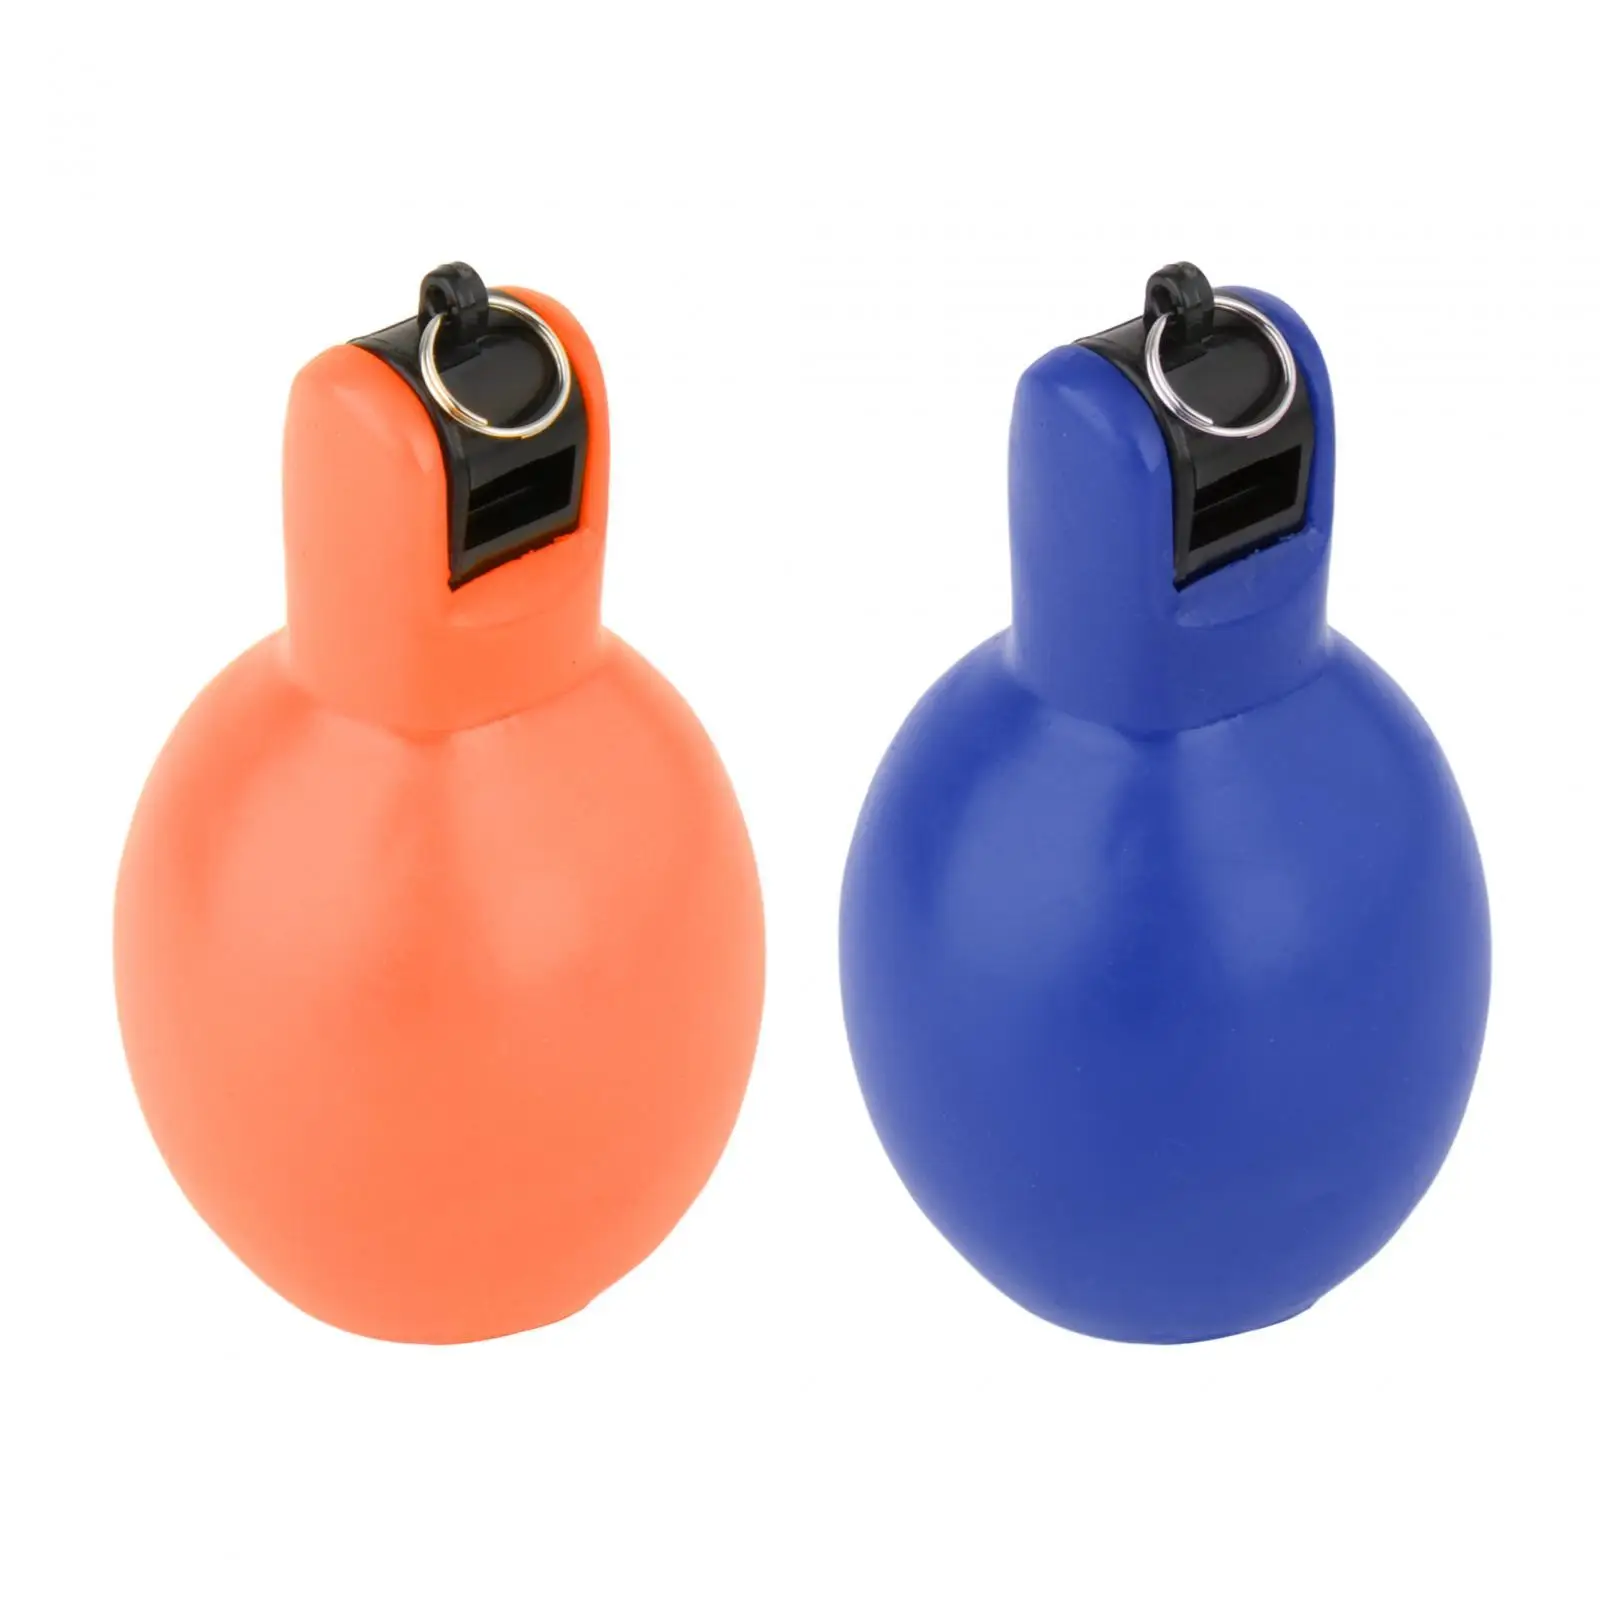 2Pcs Hand Squeeze Whistles Loud Manual Handheld Soft PVC Sports Whistle for Training Indoor Outdoor Walking Home School Coaches